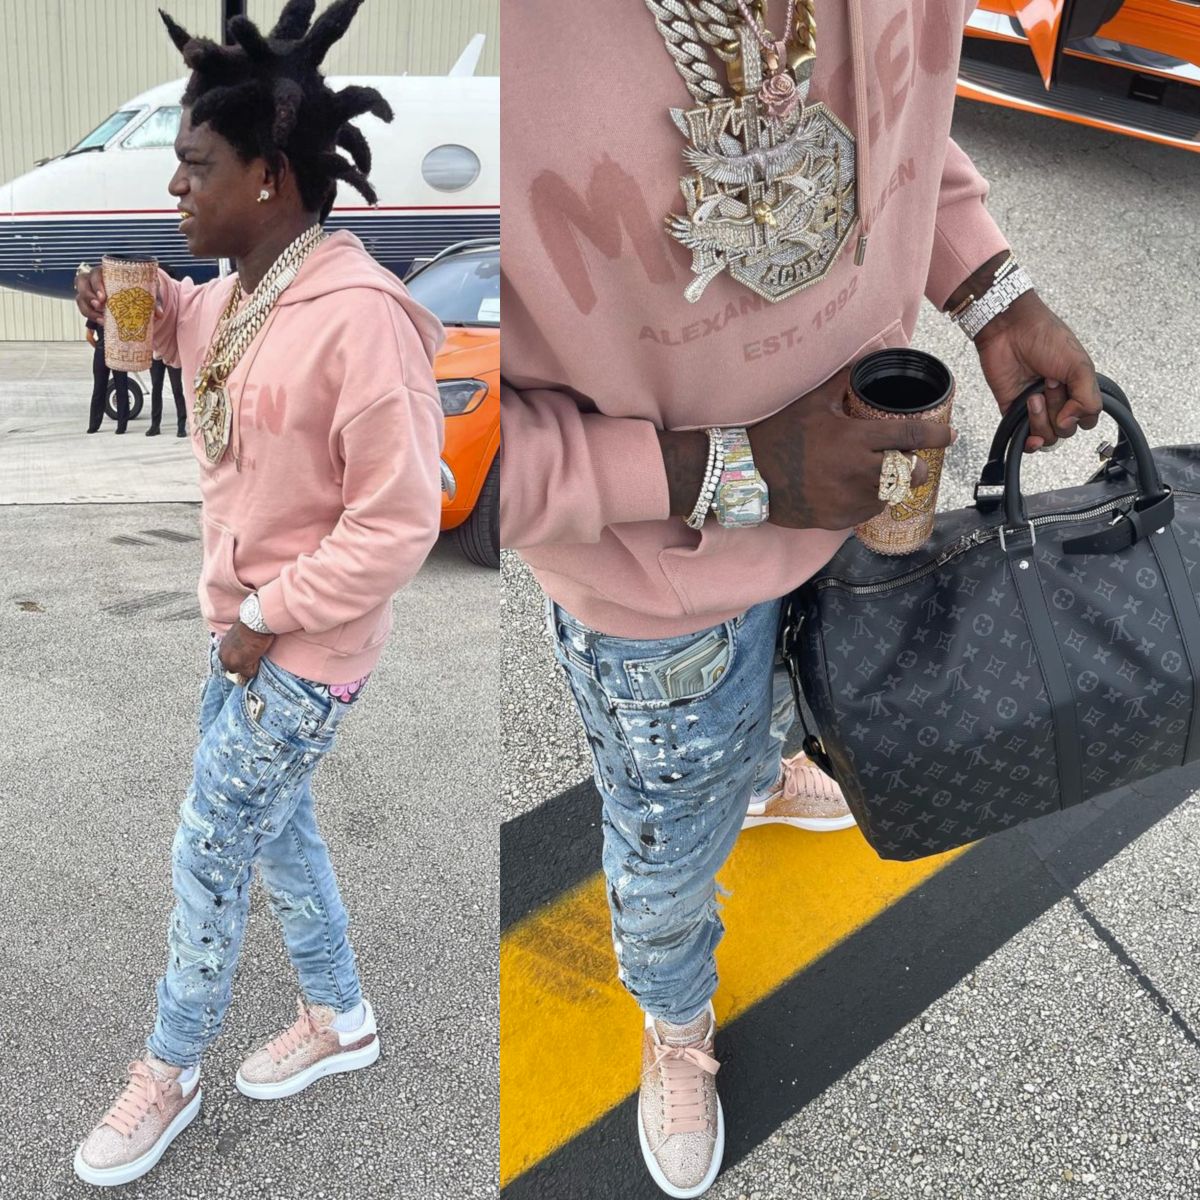 Kodak Black Wearing a Pink Alexander McQueen Outfit With a LV Bag